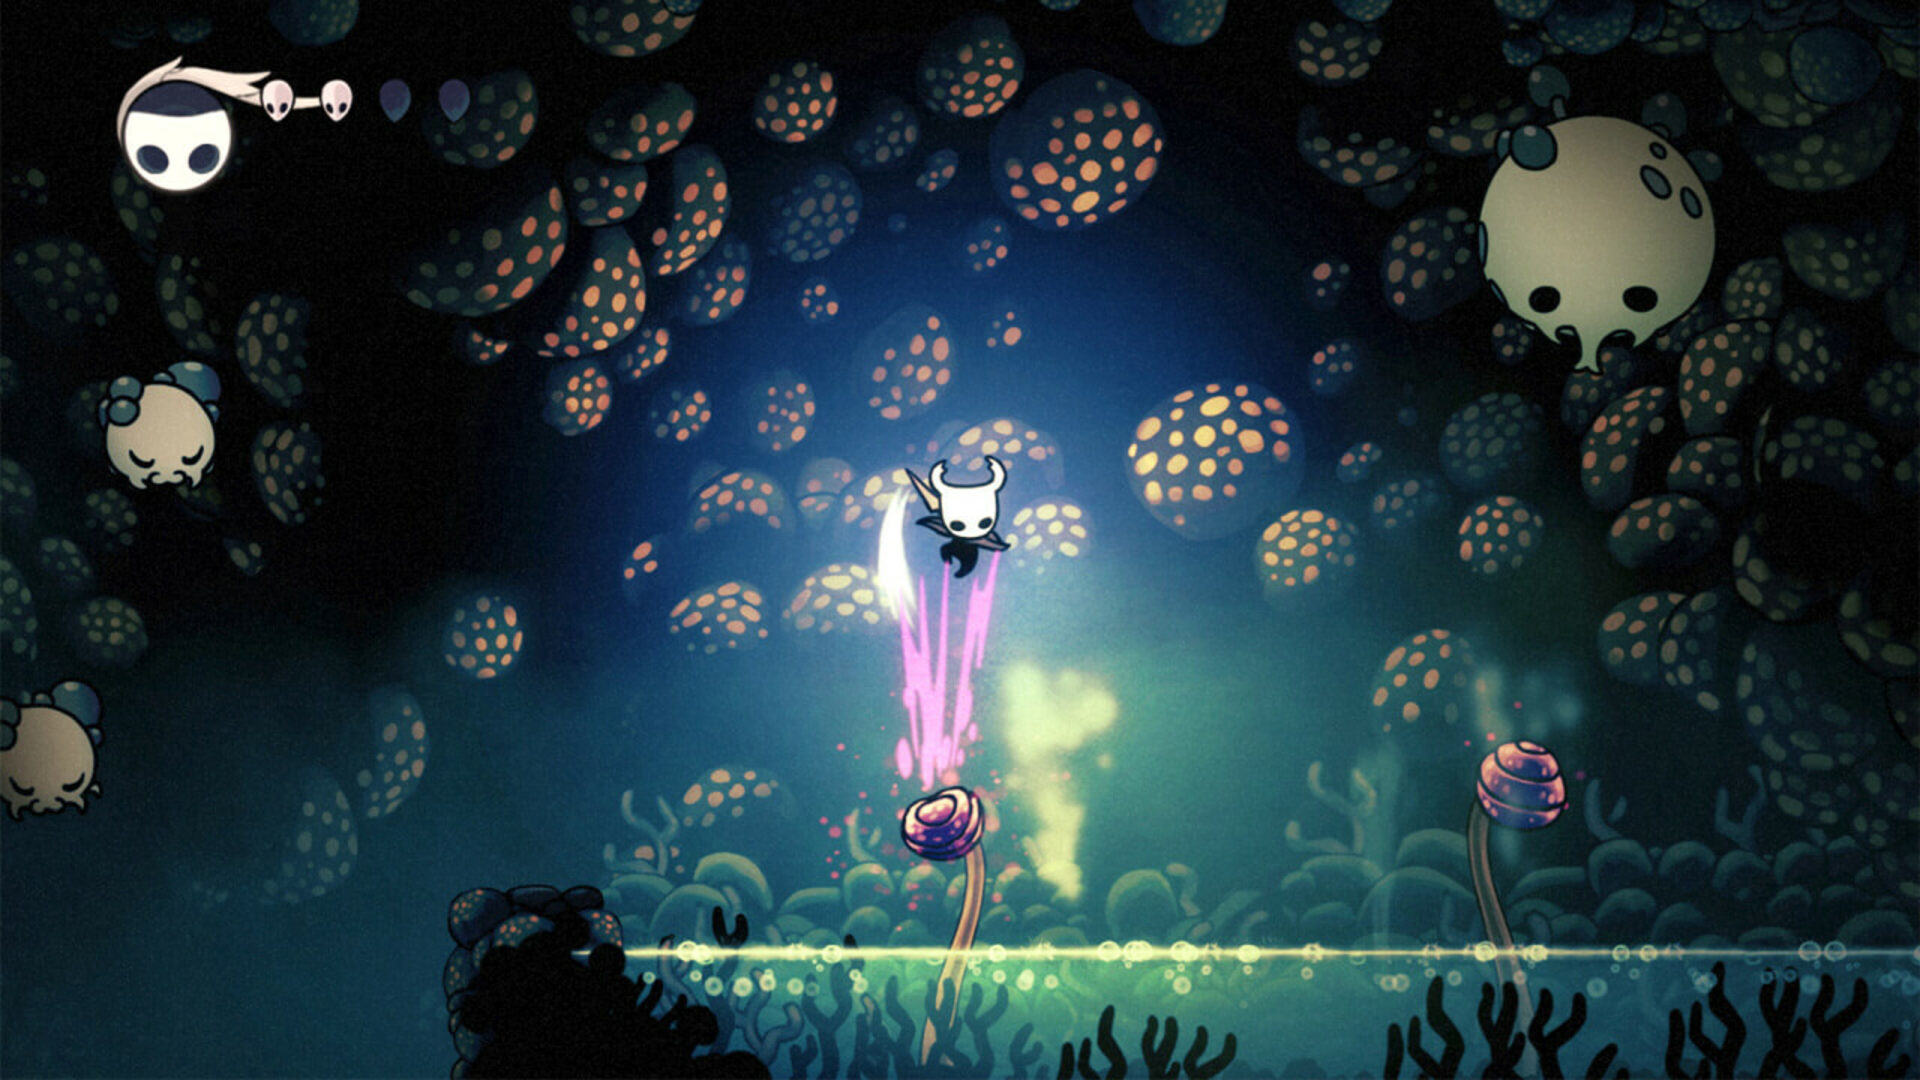 Buy Hollow Knight Steam CD Key for a Good Price Now!